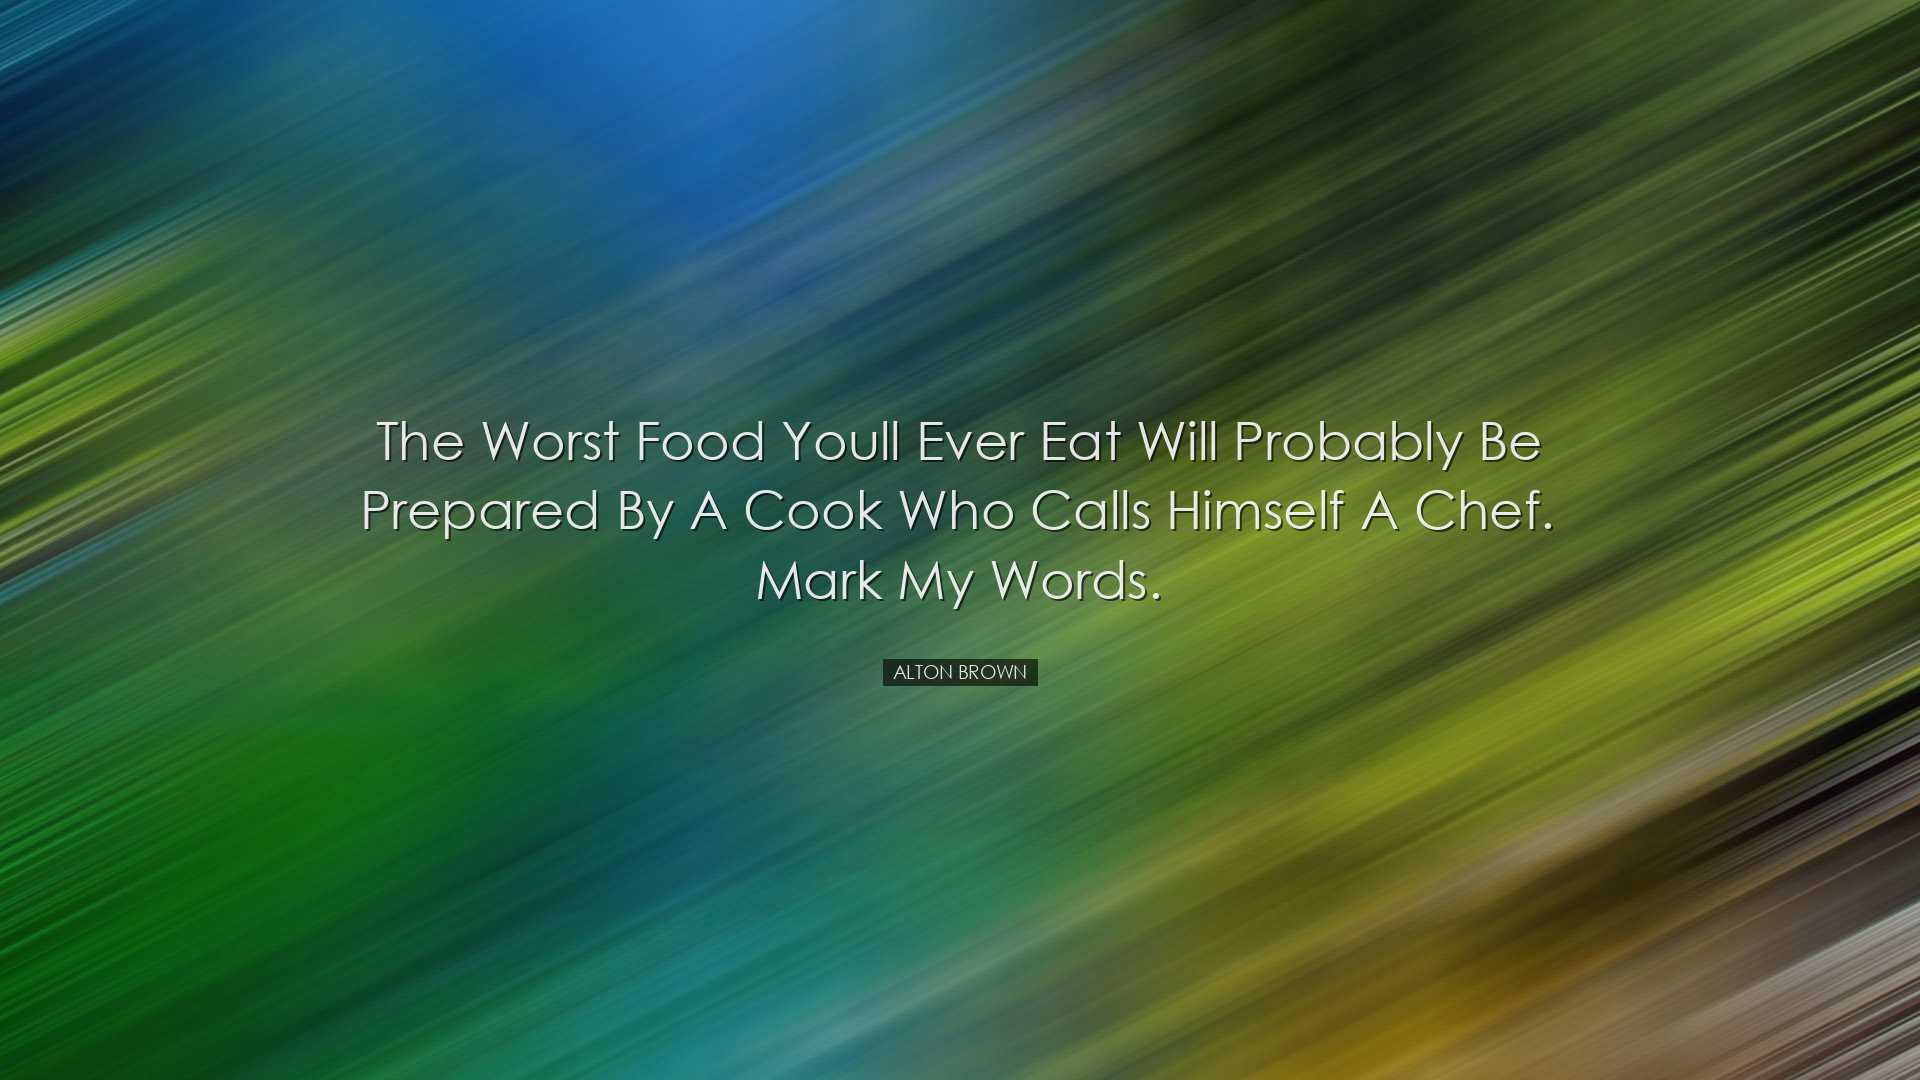 The worst food youll ever eat will probably be prepared by a cook